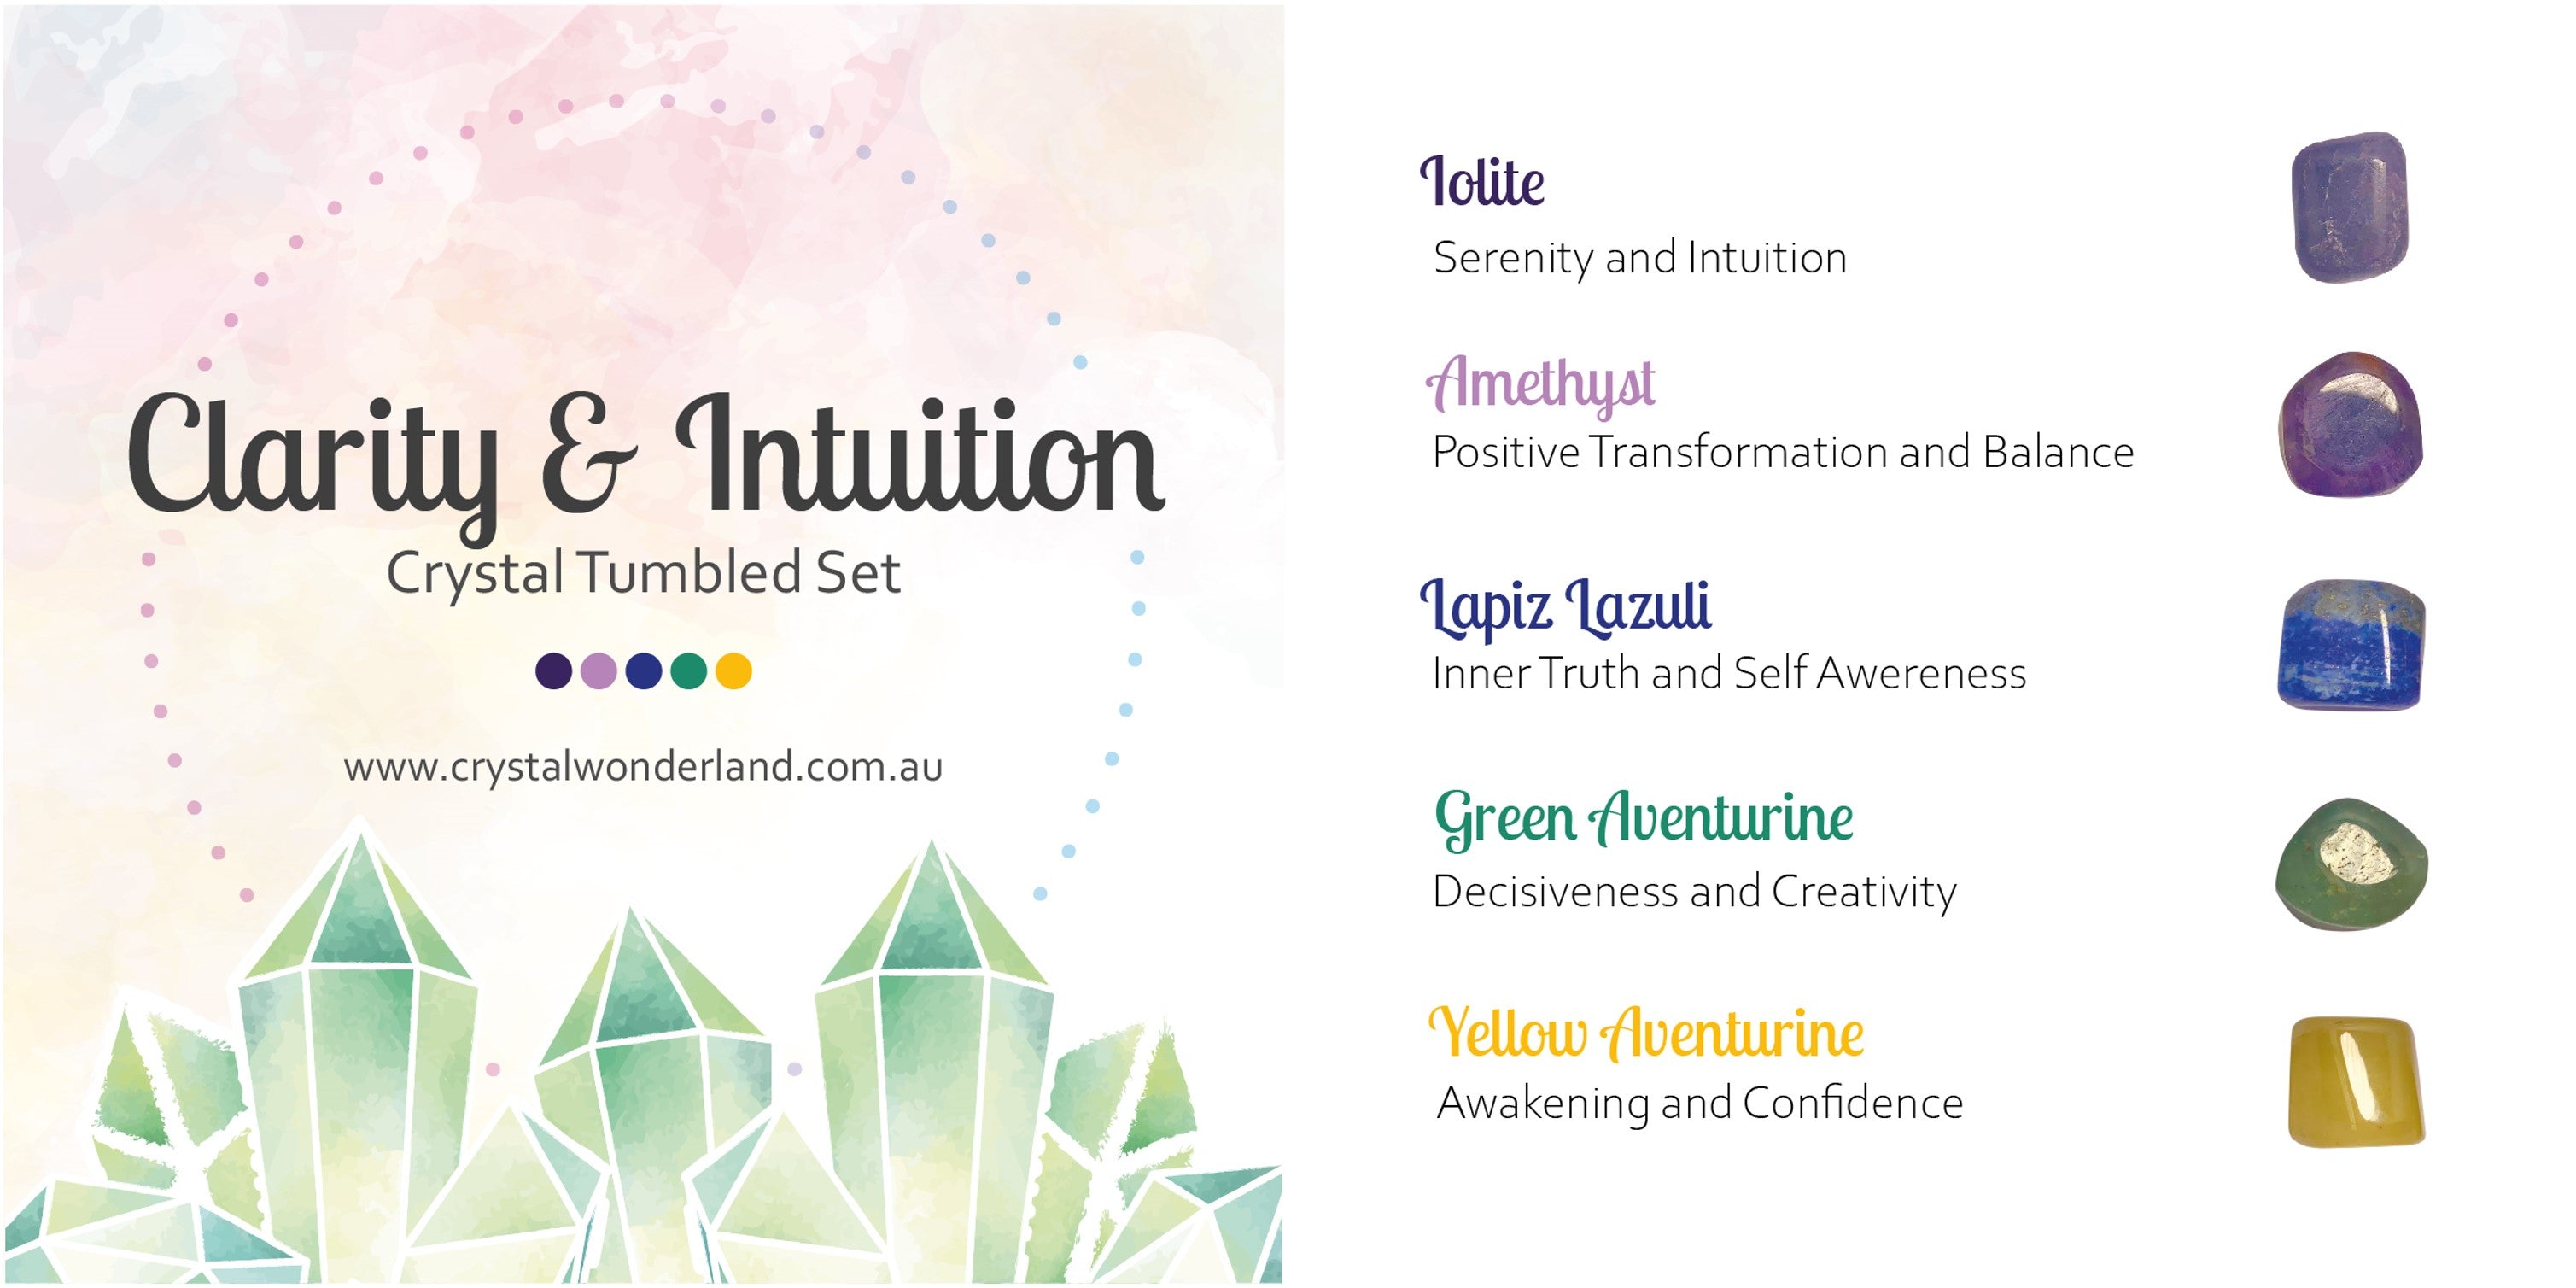 Clarity & Intuition Crystal Tumbled Gift Set